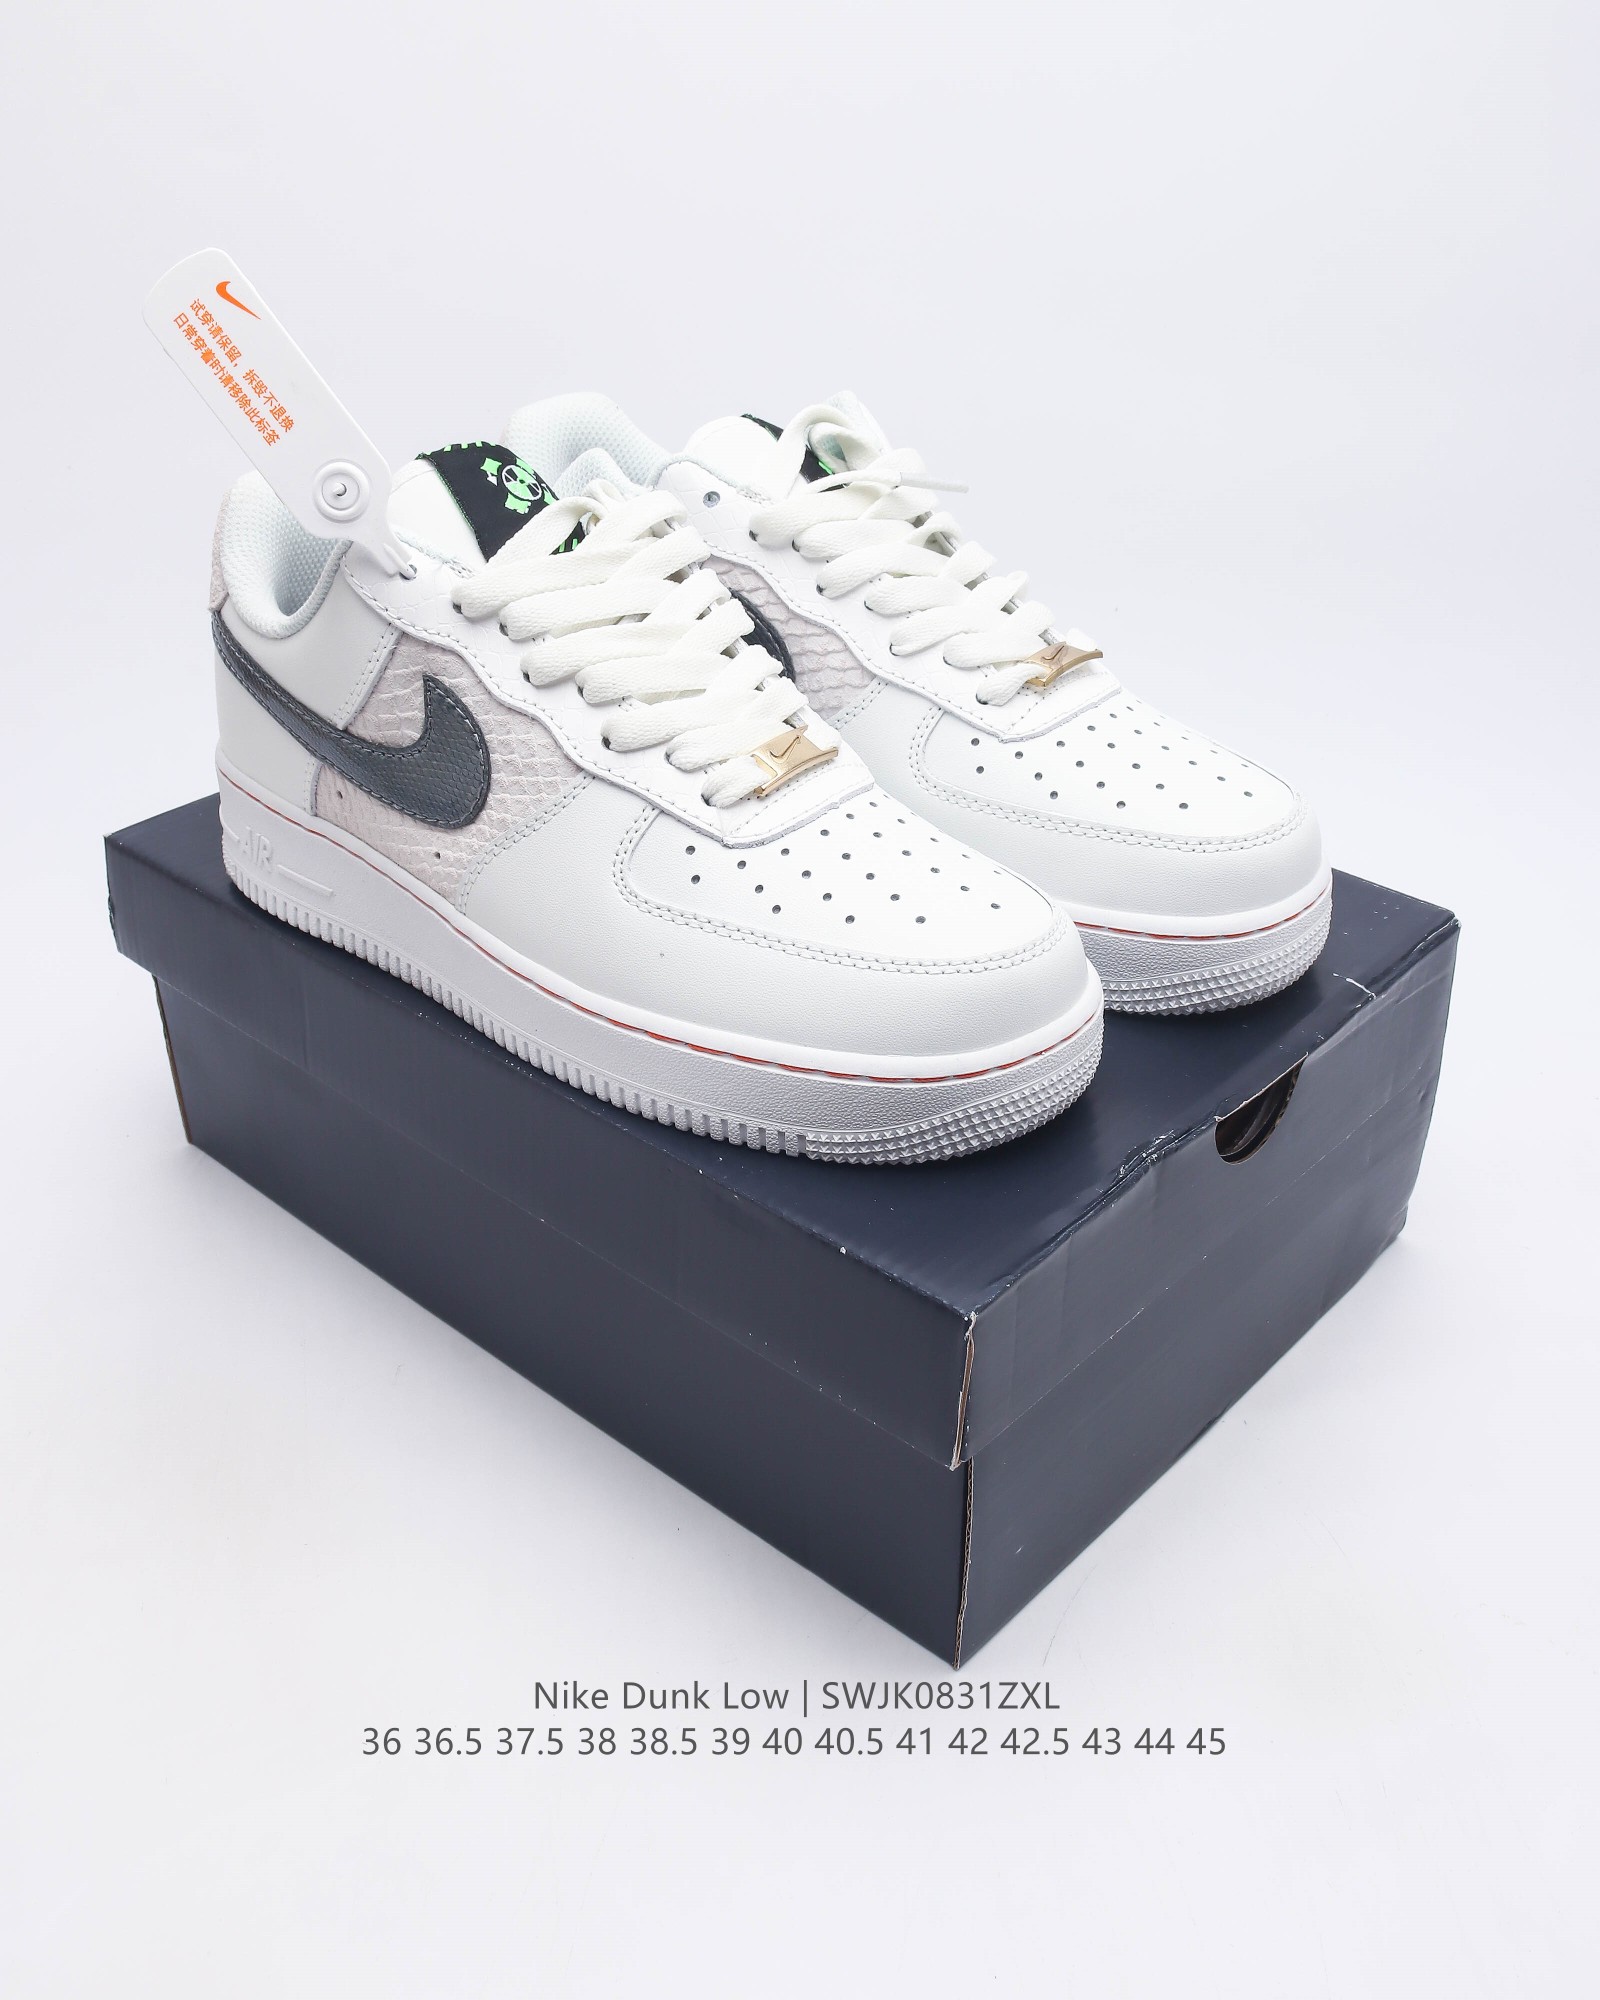 nike Air Force 1 Low force 1 Fd1036-100 36 36.5 37.5 38 38.5 39 40 40.5 41 42 4